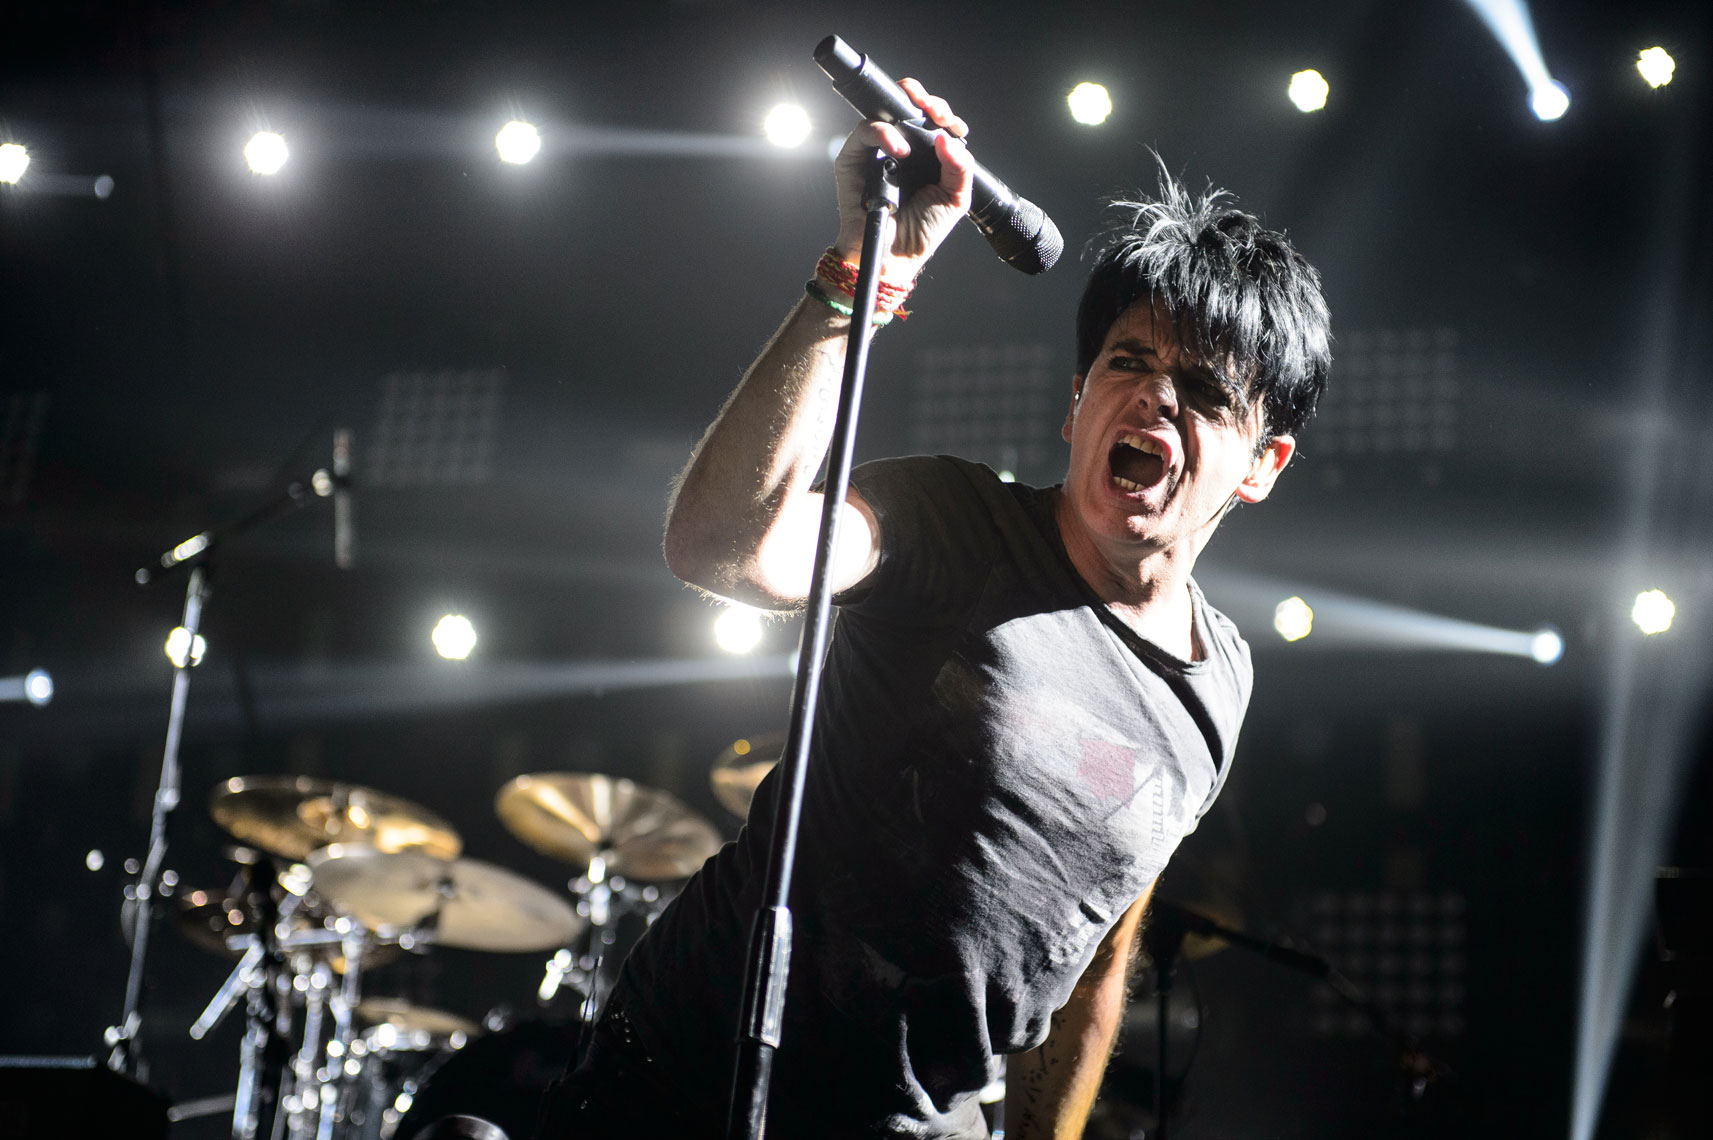 Gary-Numan-performs-at-the-2013-Mountain-Oasis-Electronic-Music-Summit